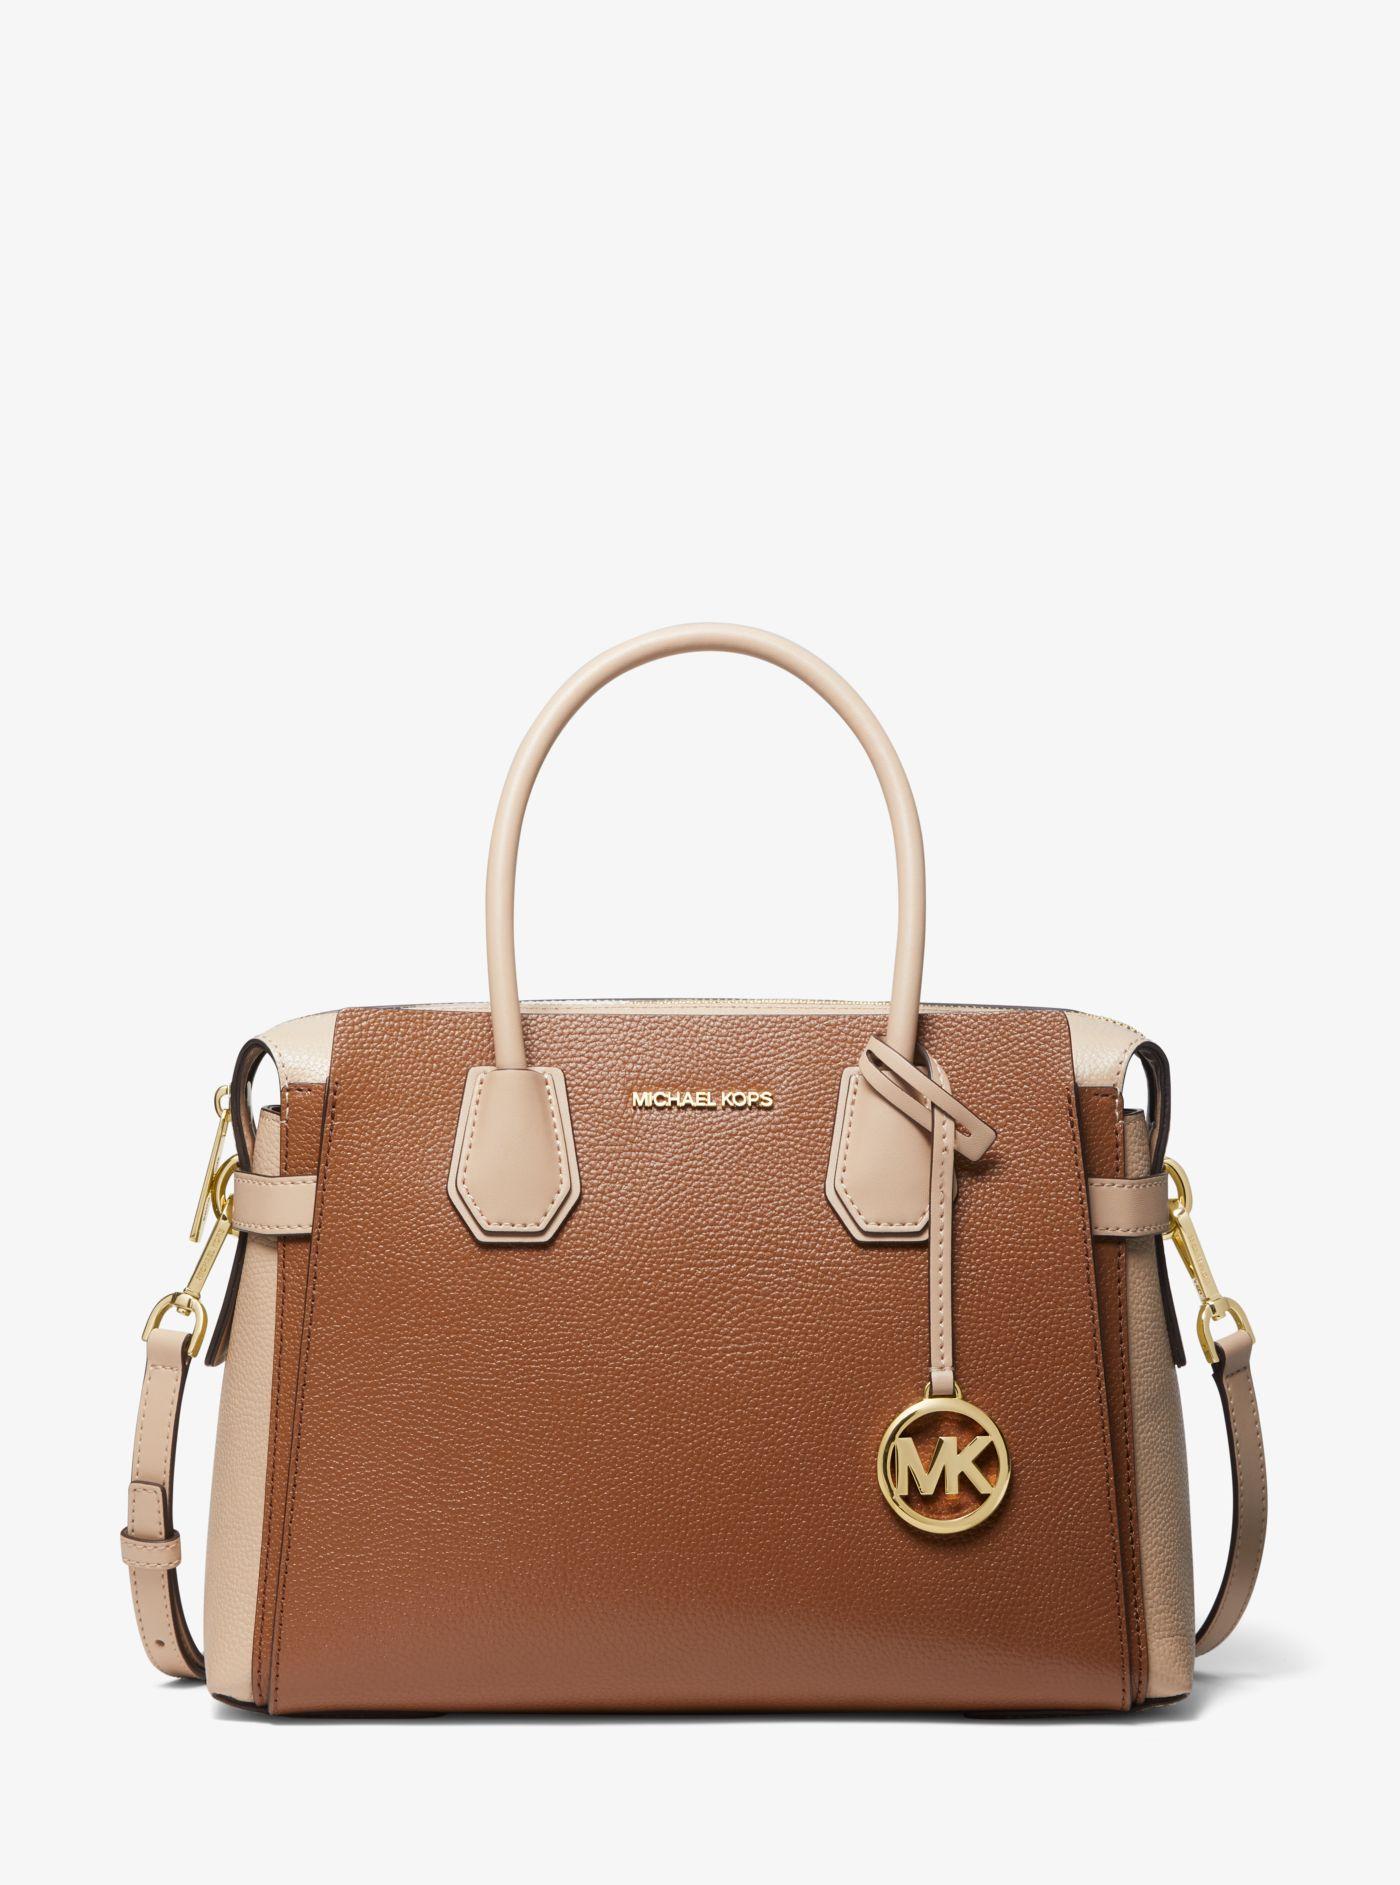 Michael Kors Mercer Medium Two-tone Pebbled Leather Belted Satchel in ...